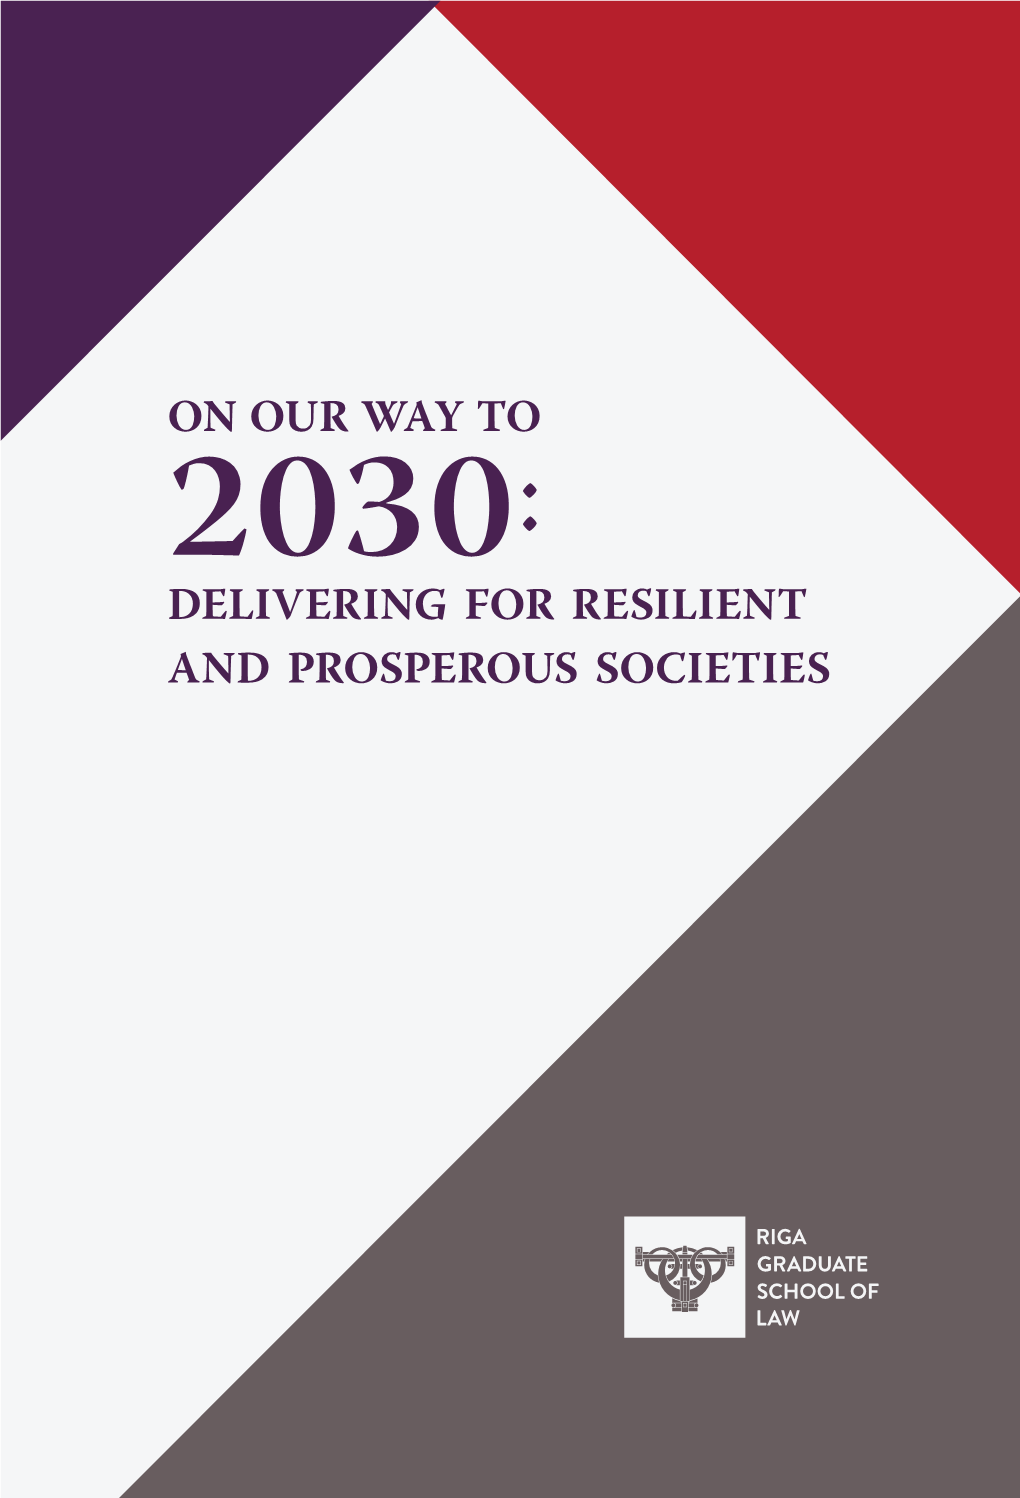 On Our Way to 2030: Delivering for Resilient and Prosperous Societies on Our Way to 2030: Delivering for Resilient and Prosperous Societies